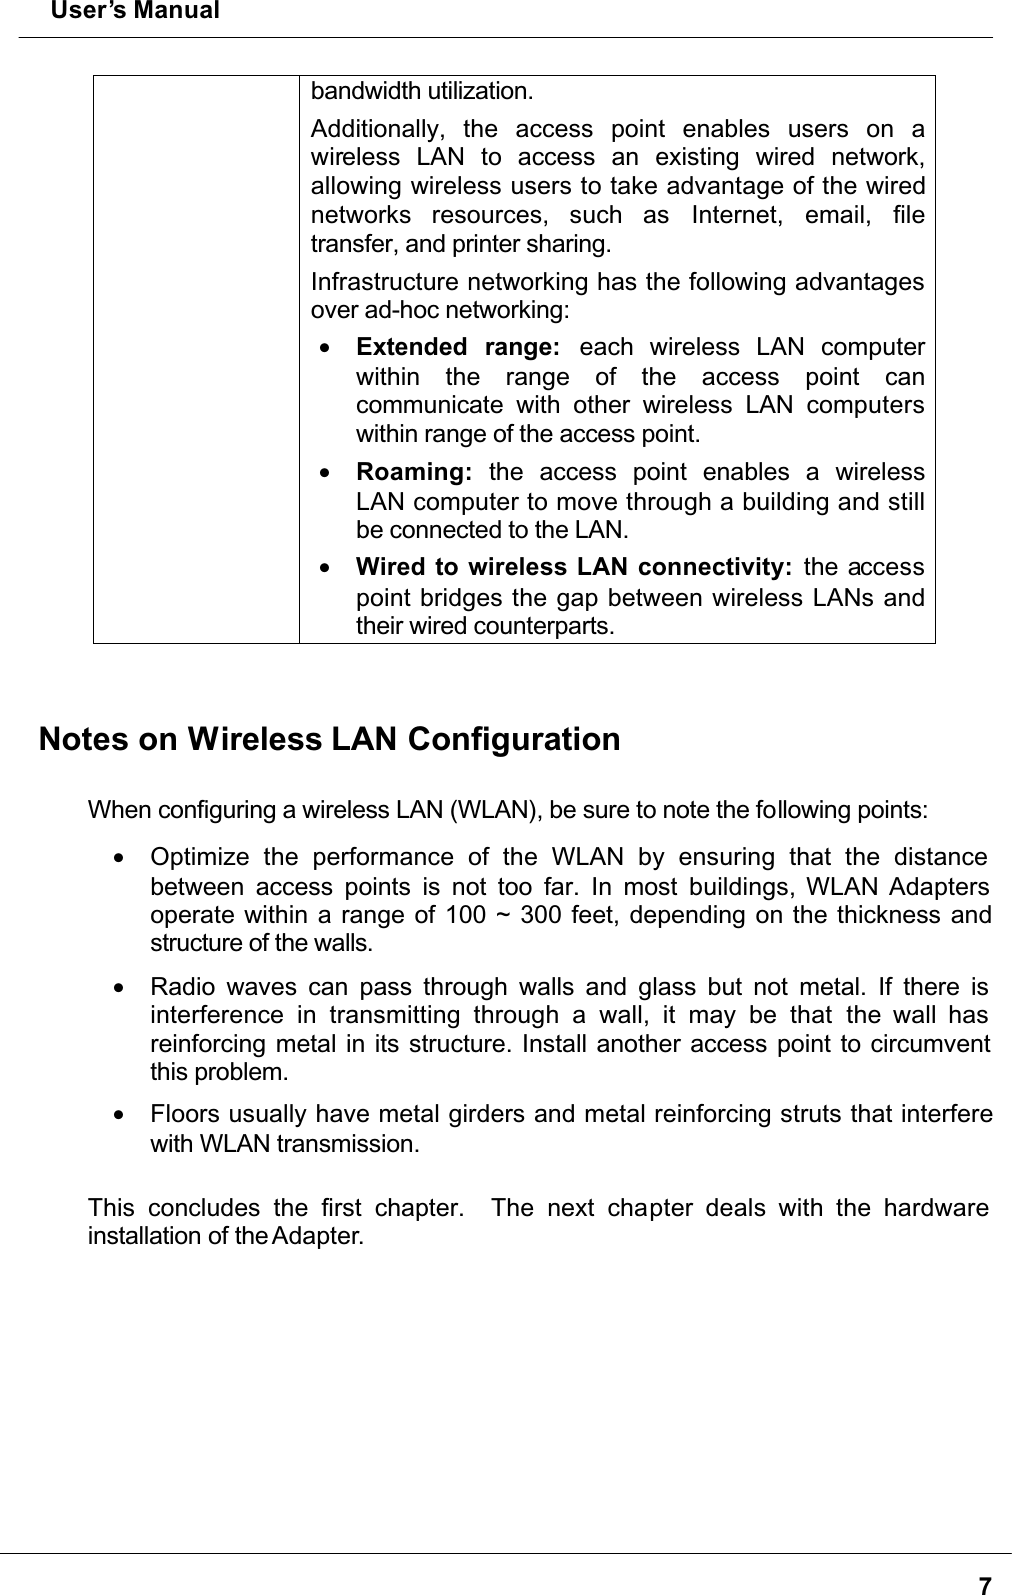  User’s Manual7bandwidth utilization. Additionally, the access point enables users on awireless LAN to access an existing wired network,allowing wireless users to take advantage of the wired networks resources, such as Internet, email, filetransfer, and printer sharing. Infrastructure networking has the following advantages over ad-hoc networking:•  Extended range:  each wireless LAN computerwithin the range of the access point cancommunicate with other wireless LAN computerswithin range of the access point.•  Roaming: the access point enables a wirelessLAN computer to move through a building and still be connected to the LAN.•  Wired to wireless LAN connectivity: the accesspoint bridges the gap between wireless LANs and their wired counterparts.Notes on Wireless LAN ConfigurationWhen configuring a wireless LAN (WLAN), be sure to note the following points:•  Optimize the performance of the WLAN by ensuring that the distance between access points is not too far. In most buildings, WLAN Adapters operate within a range of 100 ~ 300 feet, depending on the thickness and structure of the walls. •  Radio waves can pass through walls and glass but not metal. If there is interference in transmitting through a wall, it may be that the wall has reinforcing metal in its structure. Install another access point to circumvent this problem.•  Floors usually have metal girders and metal reinforcing struts that interfere with WLAN transmission.This concludes the first chapter.  The next chapter deals with the hardware installation of the Adapter.